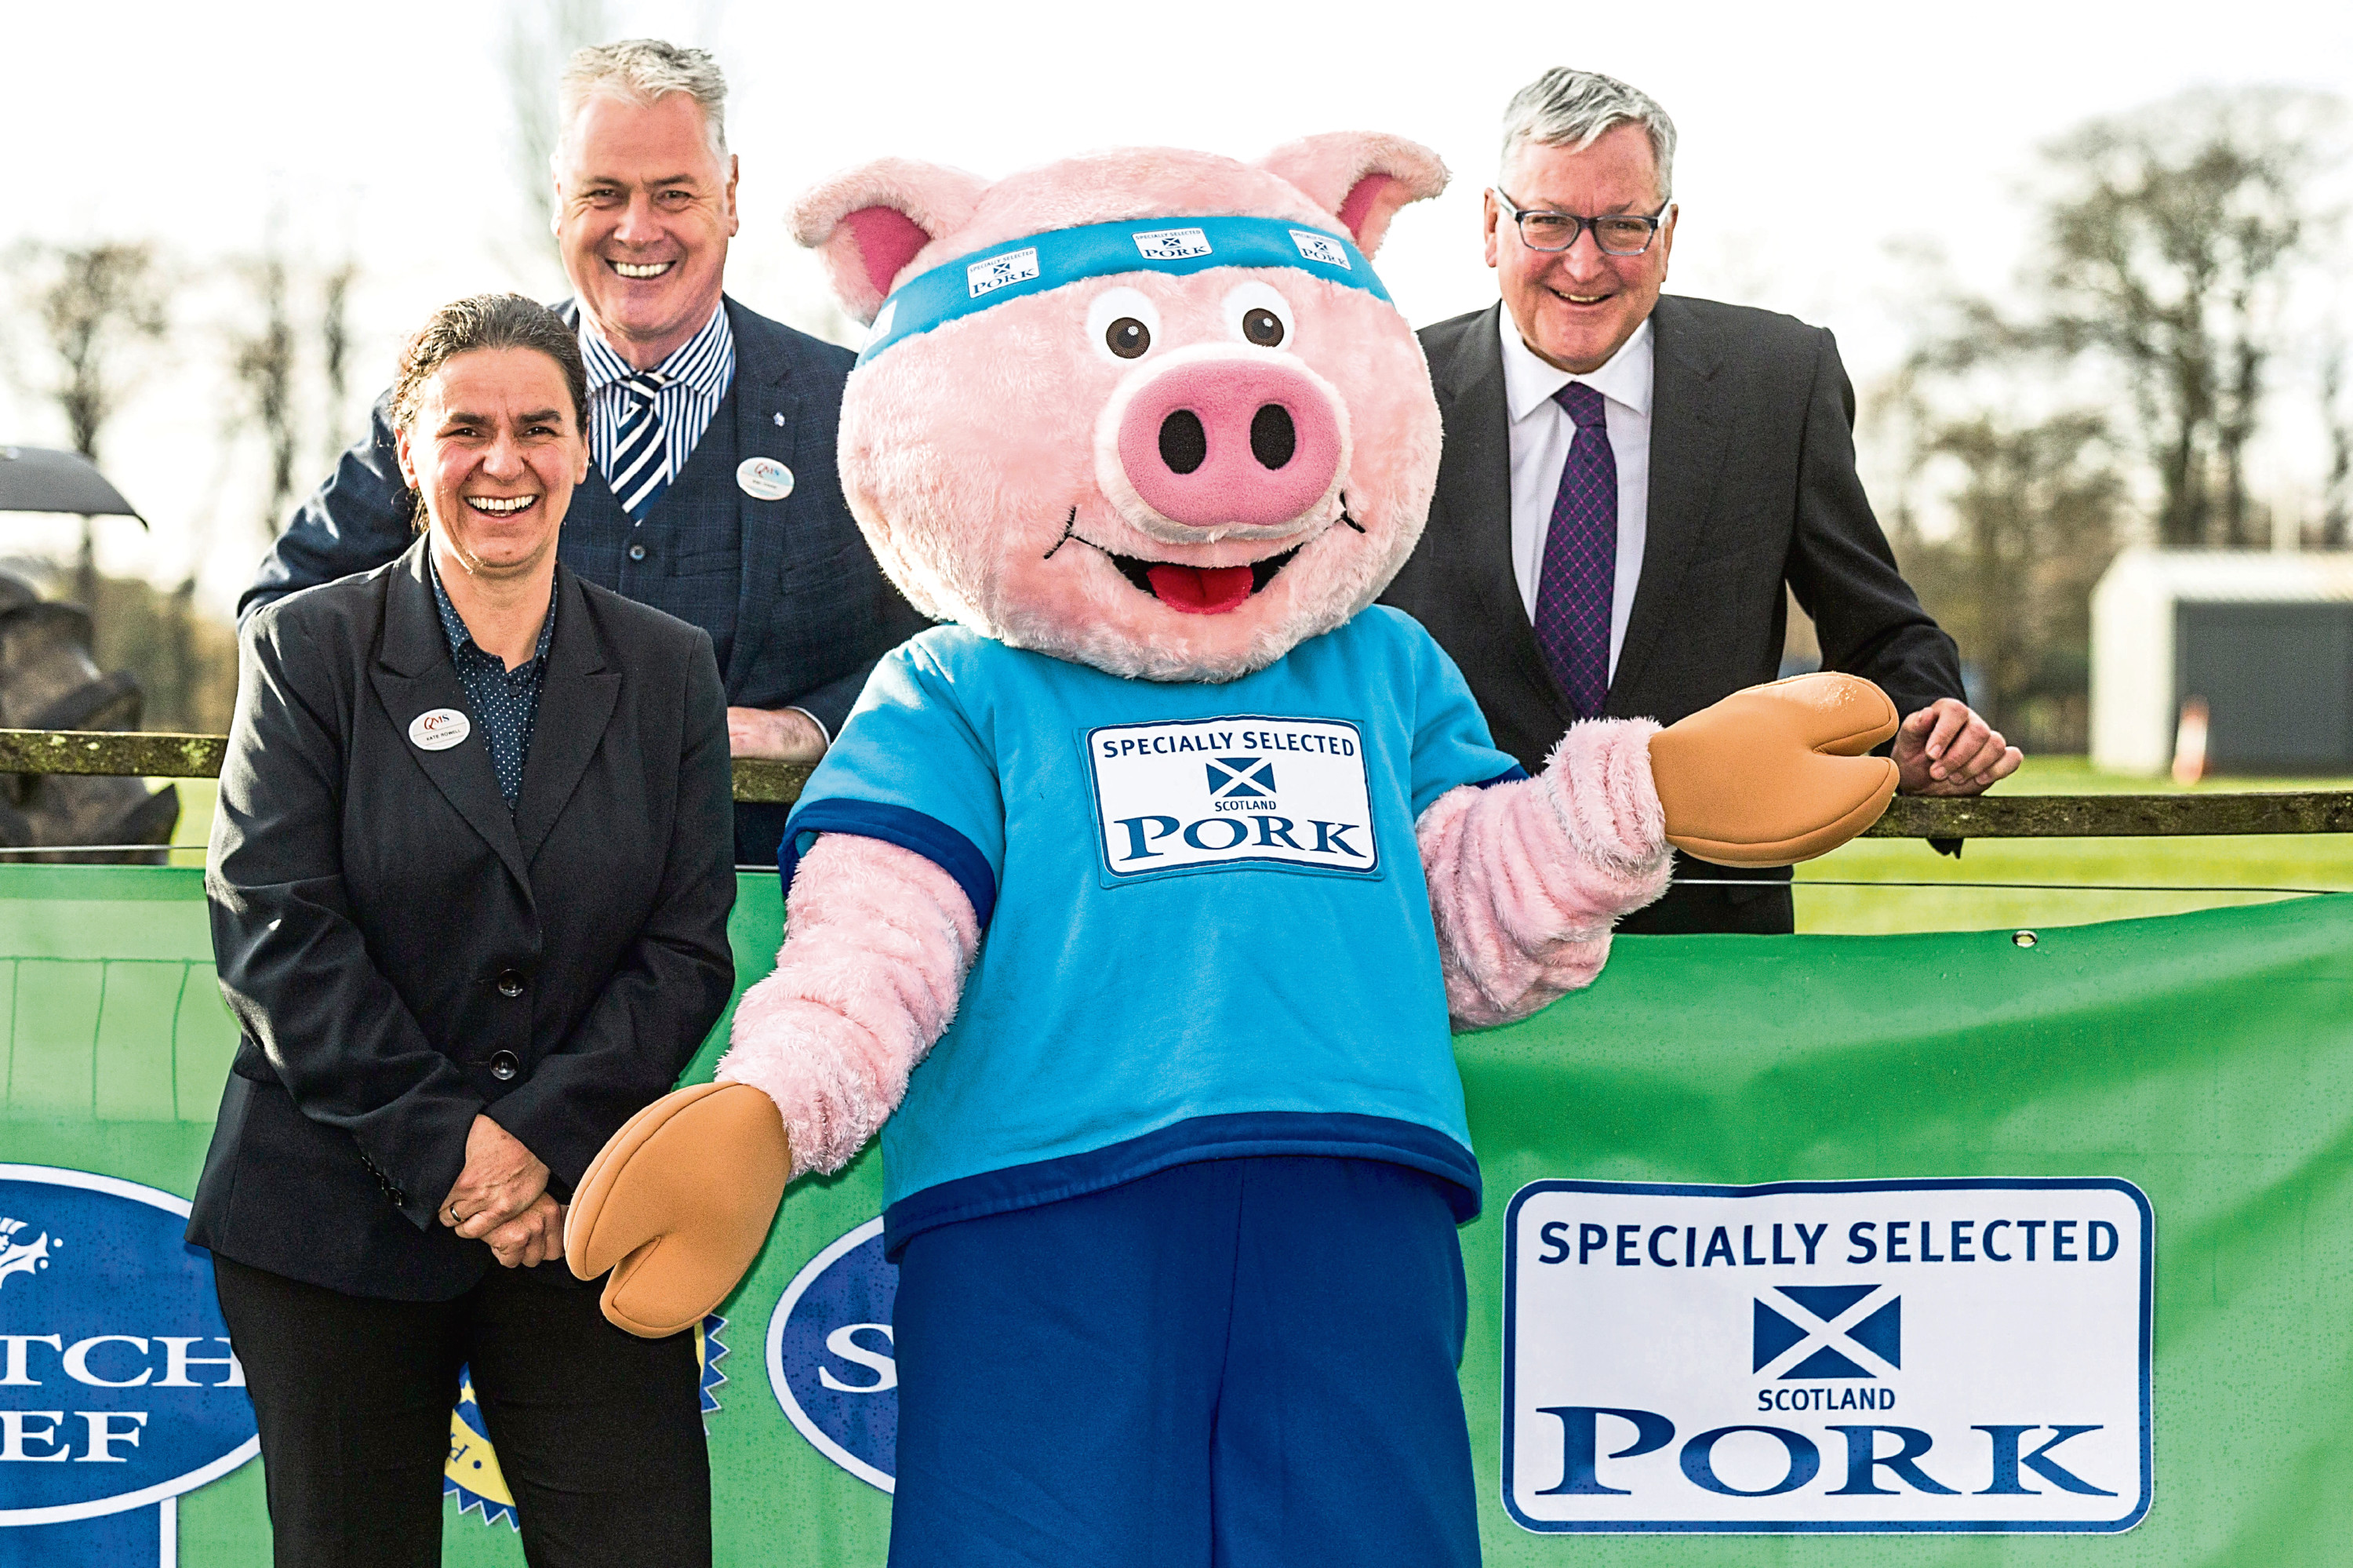 From left -QMS chairman Kate Rowell, QMS chief executive Alan Clarke, the Specially Selected Pork mascot and Rural Economy Secretary Fergus Ewing.